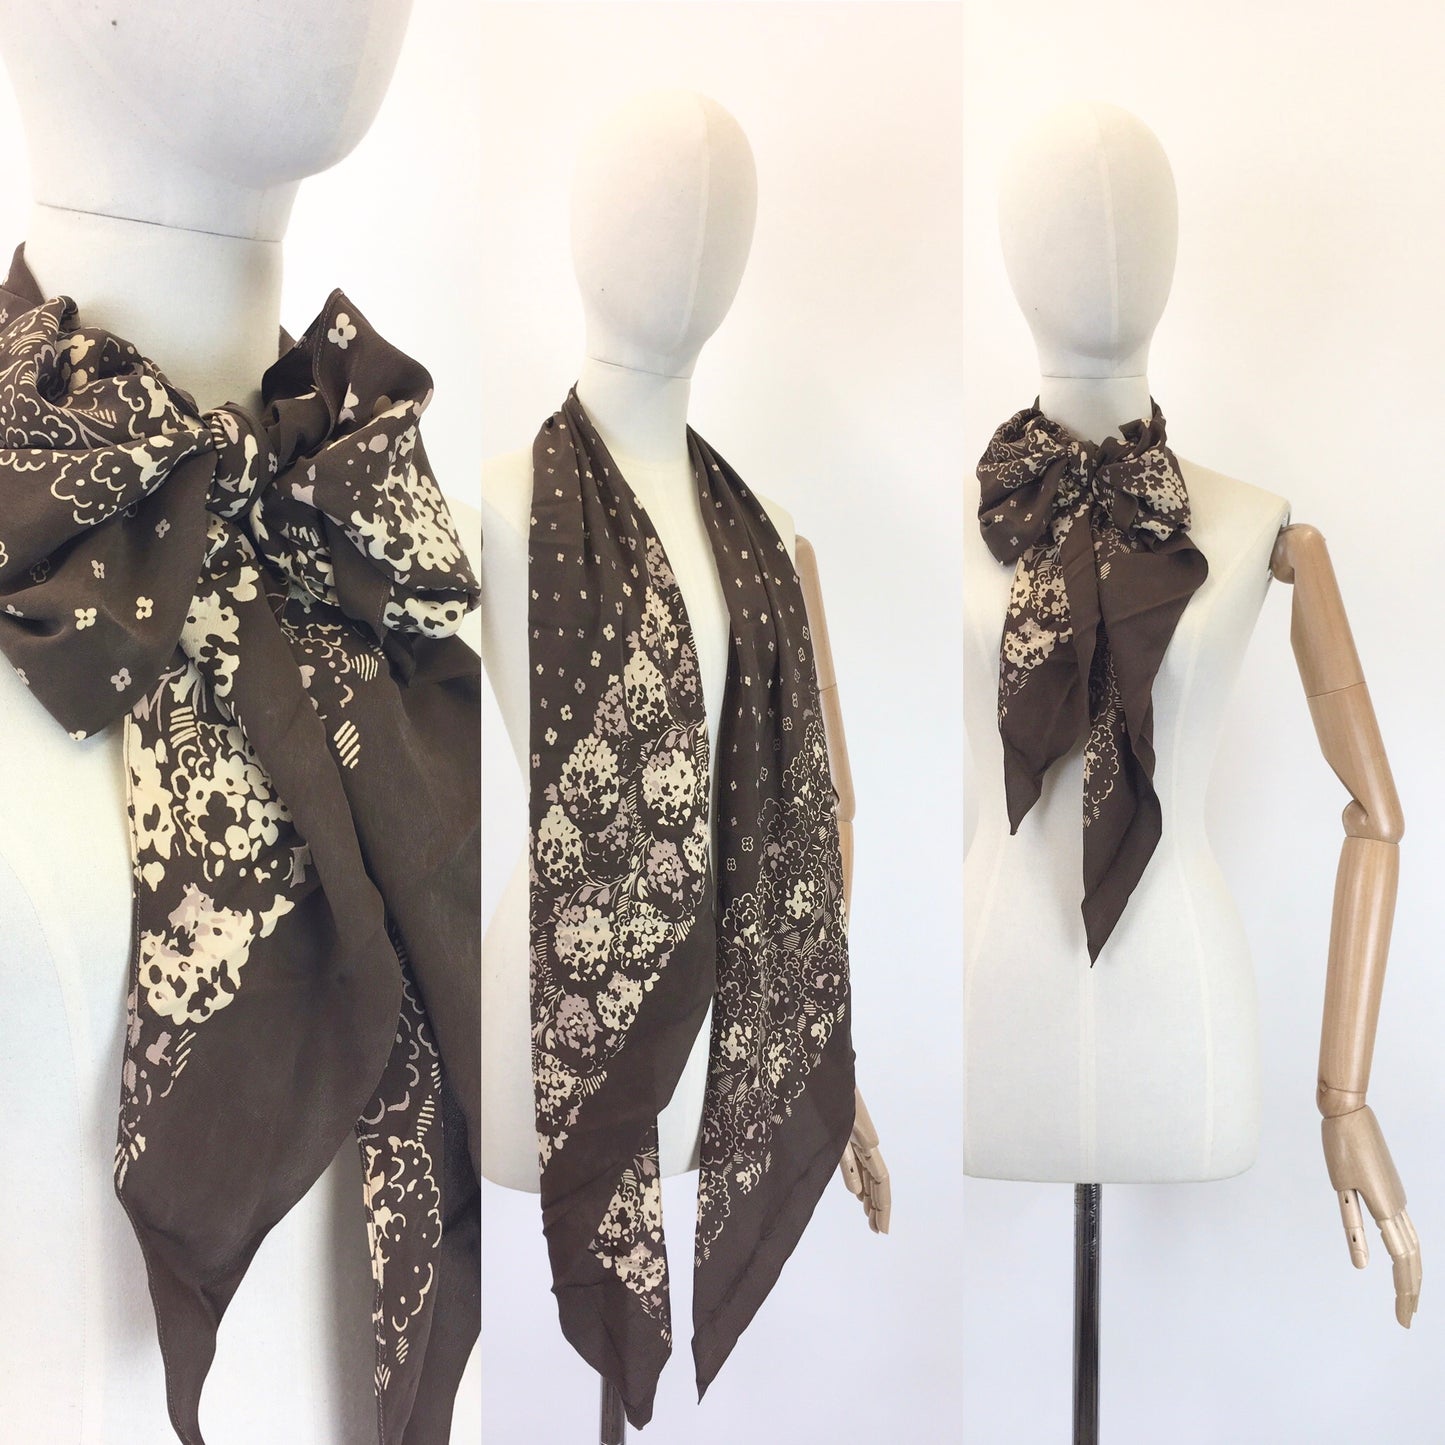 Original 1930’s Stunning Deco Pointed Scarf - In Floral Autumnal Brown & Beige Hues